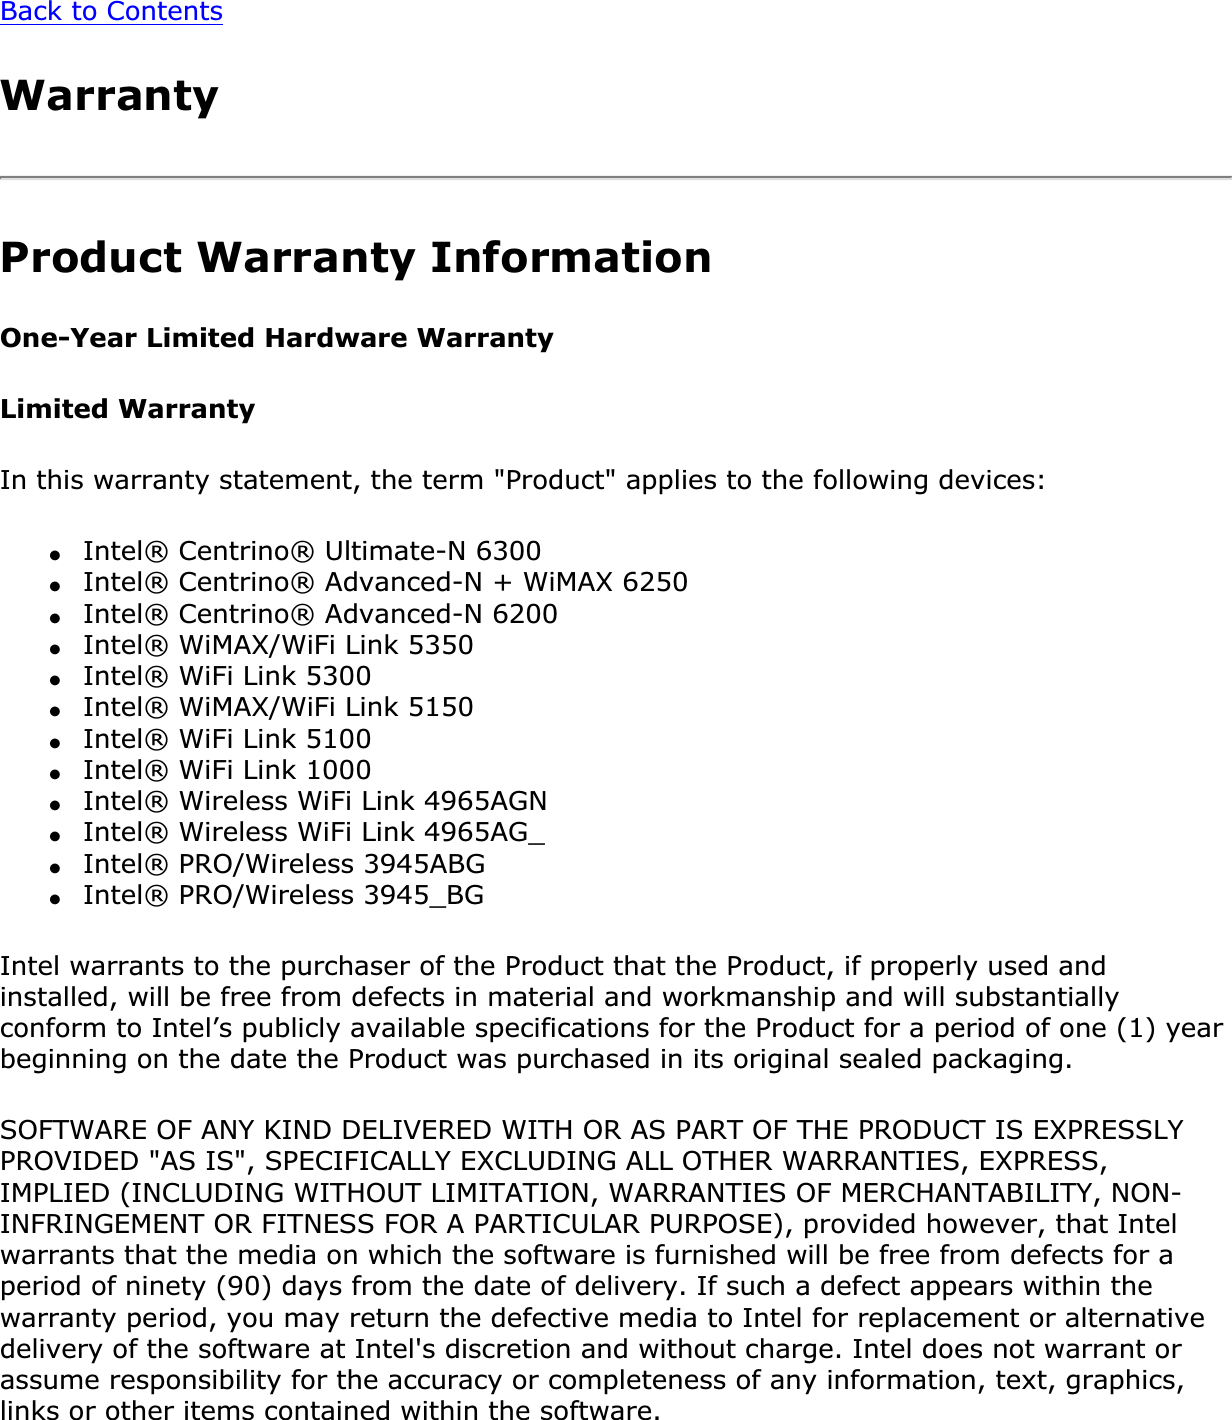 Back to ContentsWarrantyProduct Warranty InformationOne-Year Limited Hardware WarrantyLimited WarrantyIn this warranty statement, the term &quot;Product&quot; applies to the following devices:●Intel® Centrino® Ultimate-N 6300●Intel® Centrino® Advanced-N + WiMAX 6250●Intel® Centrino® Advanced-N 6200●Intel® WiMAX/WiFi Link 5350●Intel® WiFi Link 5300●Intel® WiMAX/WiFi Link 5150●Intel® WiFi Link 5100●Intel® WiFi Link 1000●Intel® Wireless WiFi Link 4965AGN●Intel® Wireless WiFi Link 4965AG_●Intel® PRO/Wireless 3945ABG●Intel® PRO/Wireless 3945_BGIntel warrants to the purchaser of the Product that the Product, if properly used and installed, will be free from defects in material and workmanship and will substantially conform to Intel’s publicly available specifications for the Product for a period of one (1) year beginning on the date the Product was purchased in its original sealed packaging.SOFTWARE OF ANY KIND DELIVERED WITH OR AS PART OF THE PRODUCT IS EXPRESSLY PROVIDED &quot;AS IS&quot;, SPECIFICALLY EXCLUDING ALL OTHER WARRANTIES, EXPRESS, IMPLIED (INCLUDING WITHOUT LIMITATION, WARRANTIES OF MERCHANTABILITY, NON-INFRINGEMENT OR FITNESS FOR A PARTICULAR PURPOSE), provided however, that Intel warrants that the media on which the software is furnished will be free from defects for a period of ninety (90) days from the date of delivery. If such a defect appears within the warranty period, you may return the defective media to Intel for replacement or alternative delivery of the software at Intel&apos;s discretion and without charge. Intel does not warrant or assume responsibility for the accuracy or completeness of any information, text, graphics, links or other items contained within the software.